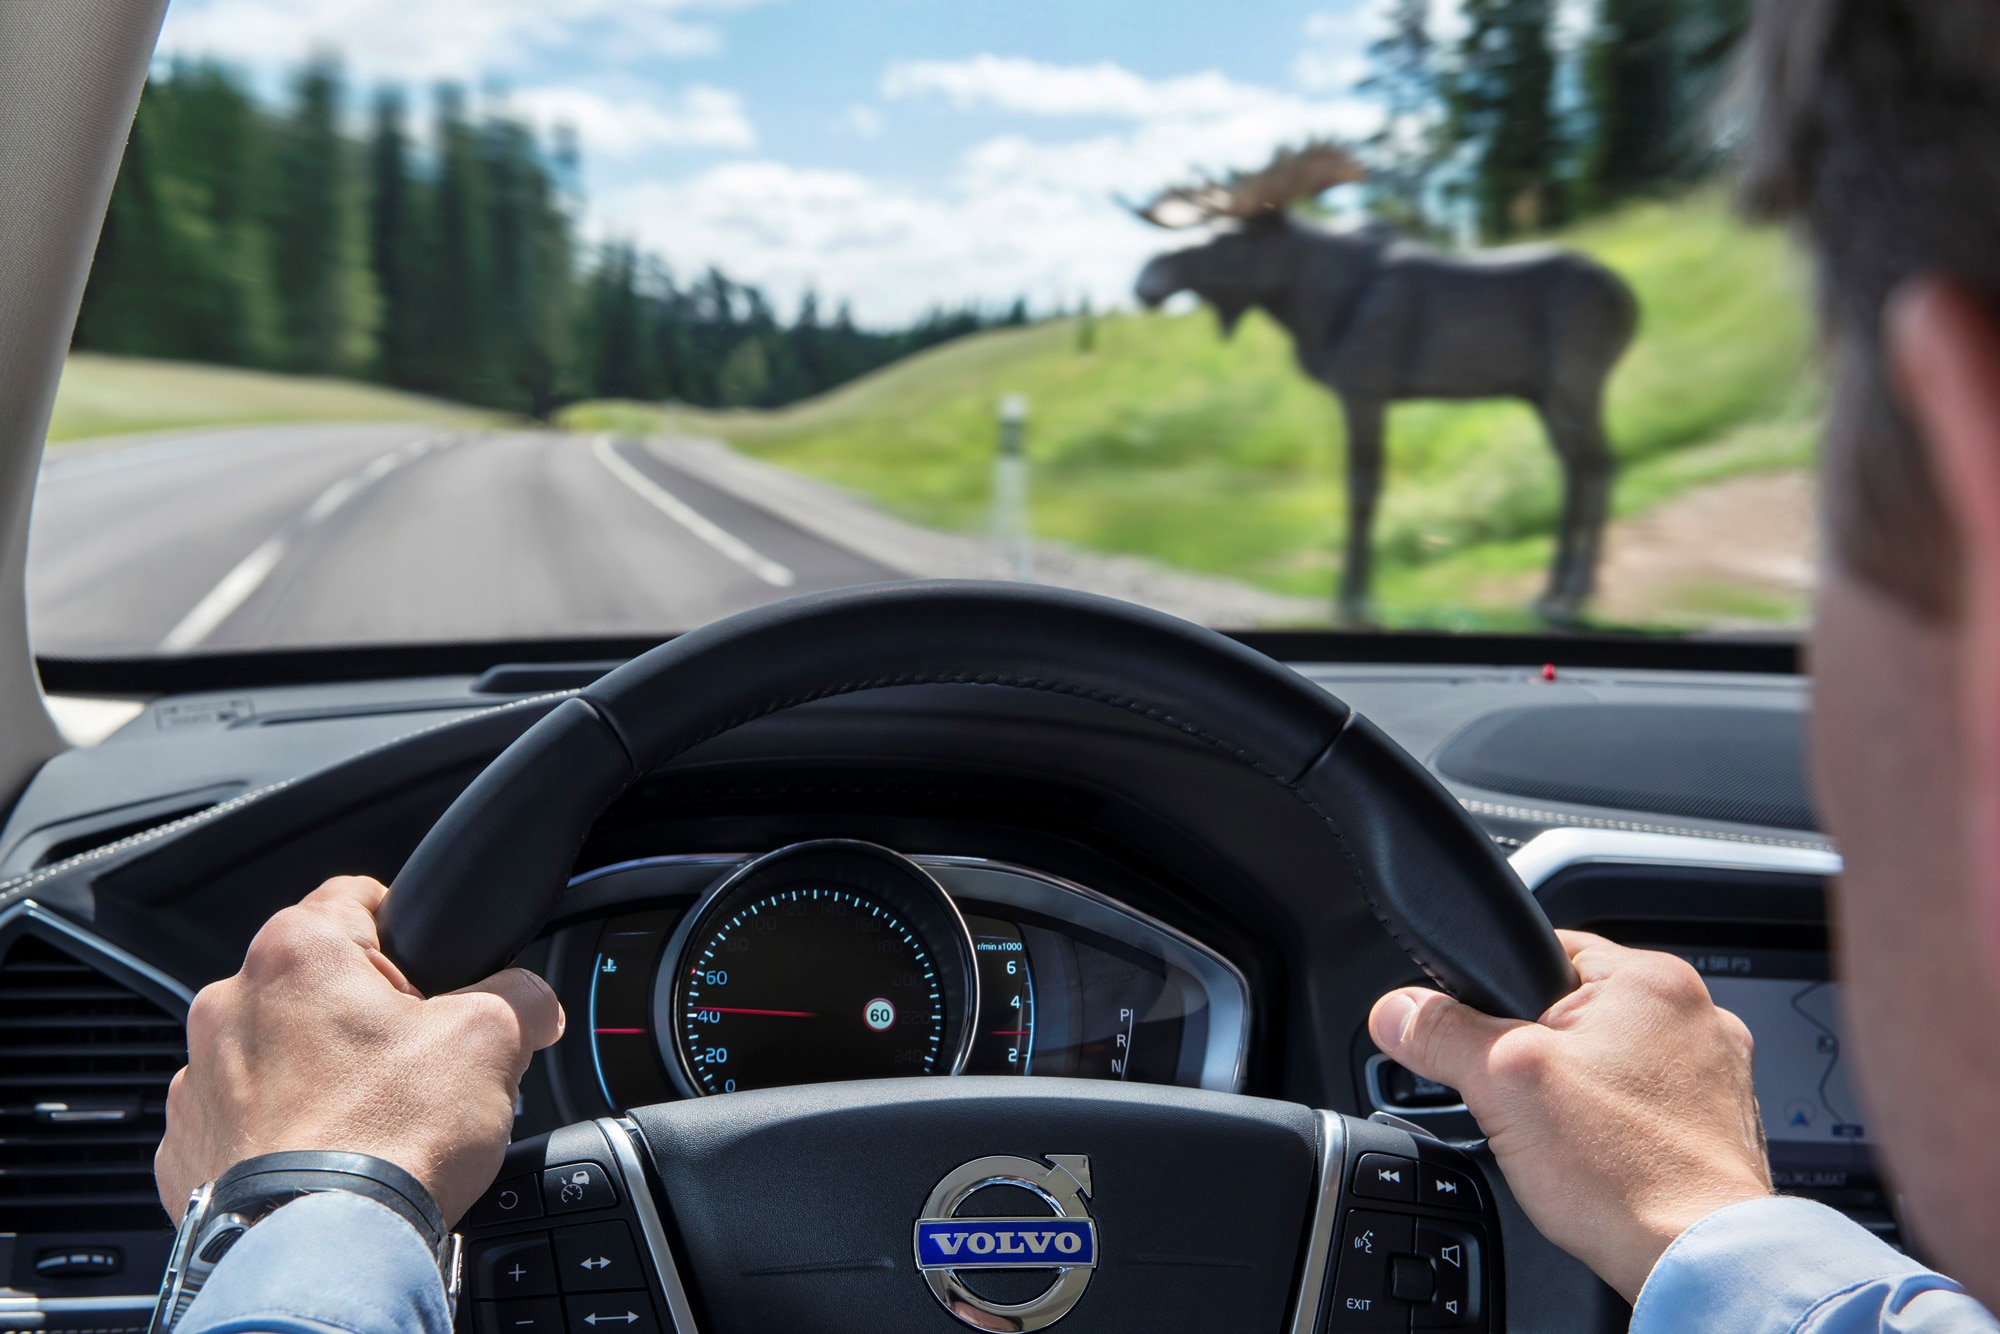 A driver steers a vehicle down a highway and a model of a moose is visible through the windshield.